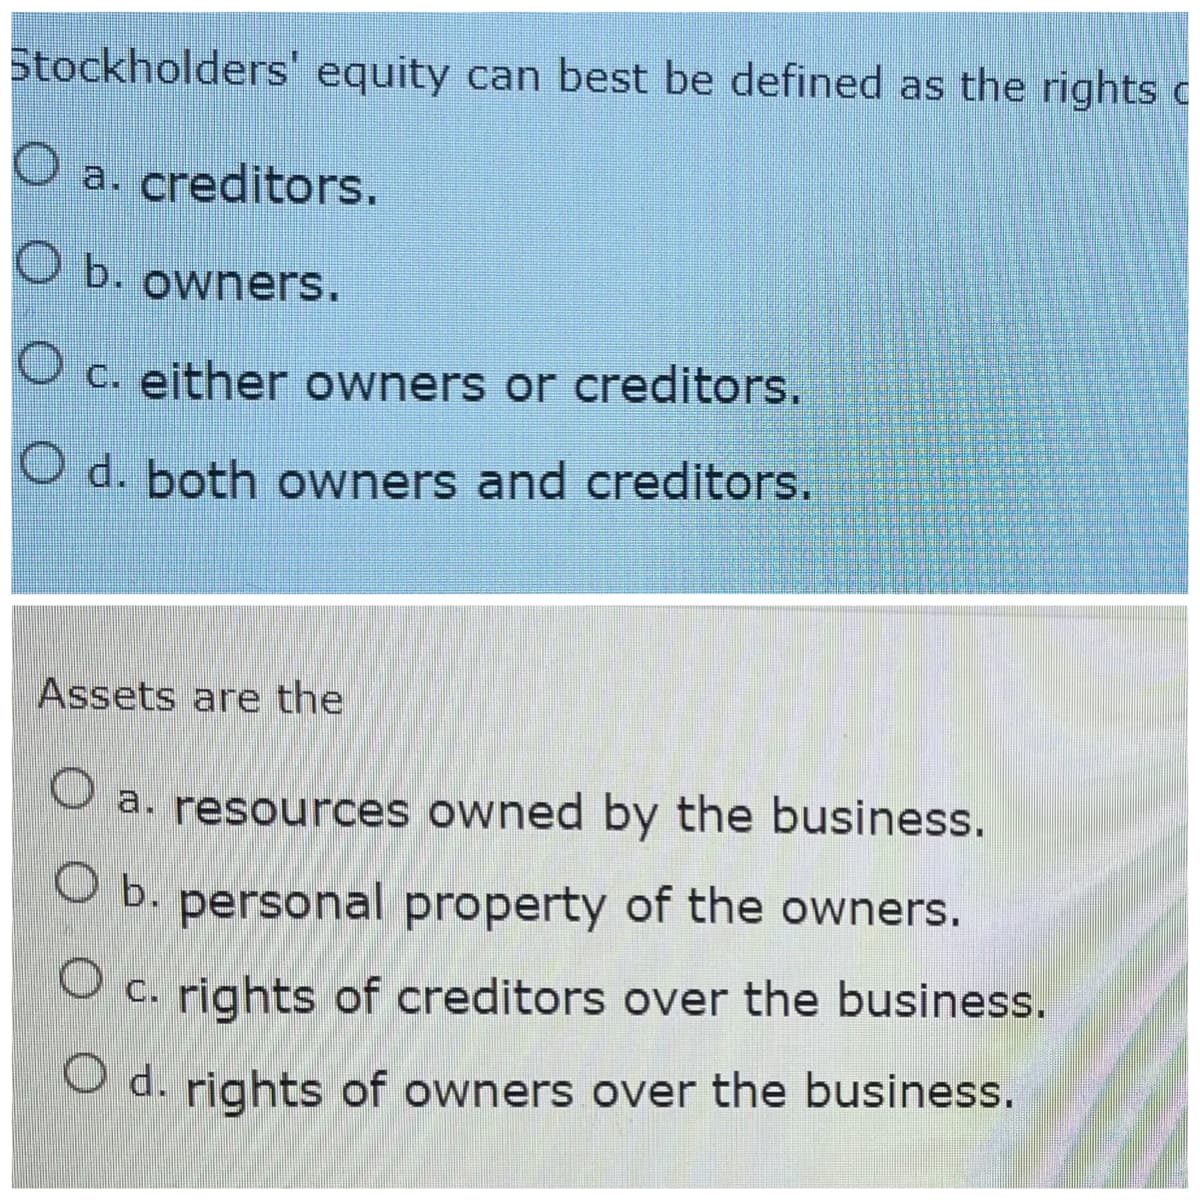 Stockholders' equity can best be defined as the rights c
O a. creditors.
O b. owners.
O c. either owners or creditors.
O d. both owners and creditors.
Assets are the
O a. resources owned by the business.
O b. personal property of the owners.
OC.
rights of creditors over the business.
O d. rights of owners over the business.